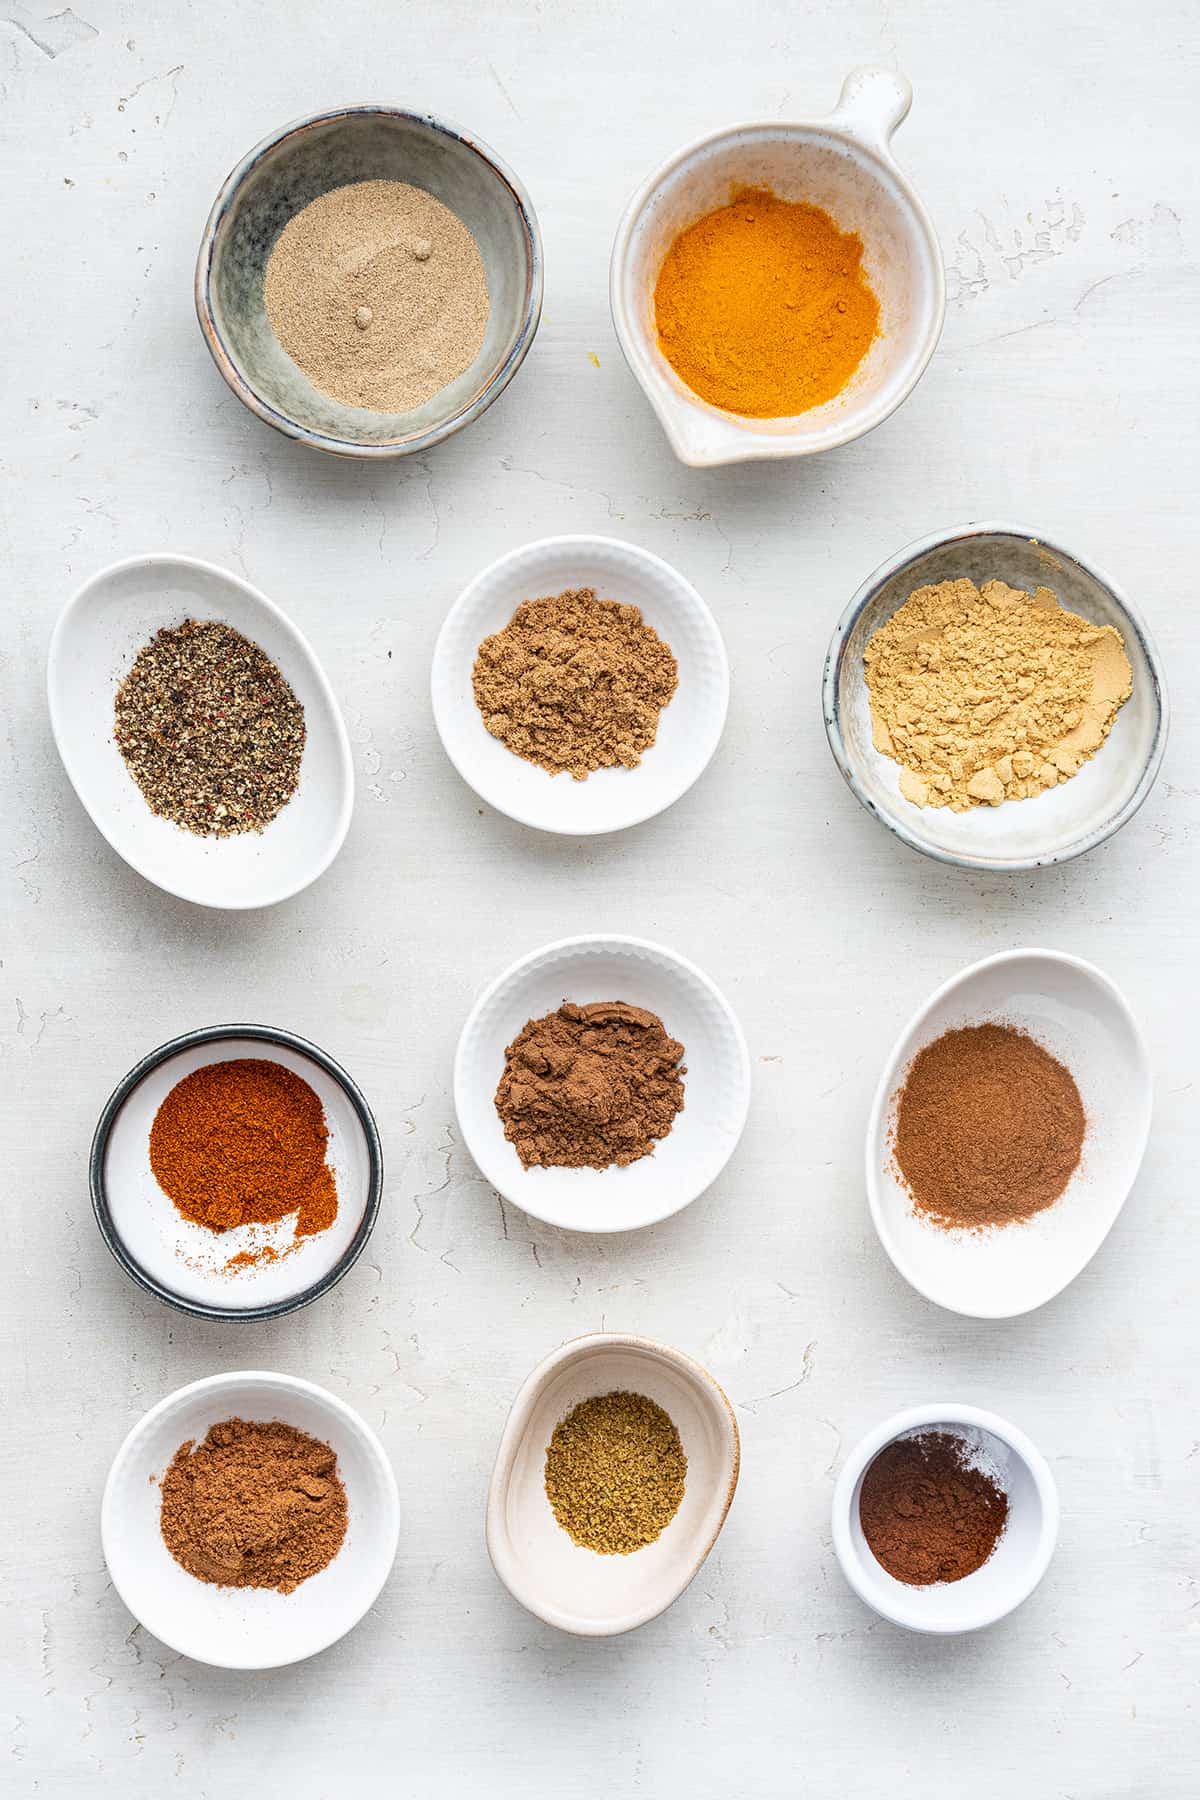 Overhead view of 11 bowls with the ingredients needed for ras el hanout: ground ginger, cardamom, allspice, nutmeg, cinnamon, coriander, turmeric, black pepper, cayenne pepper, ground anise, and ground cloves